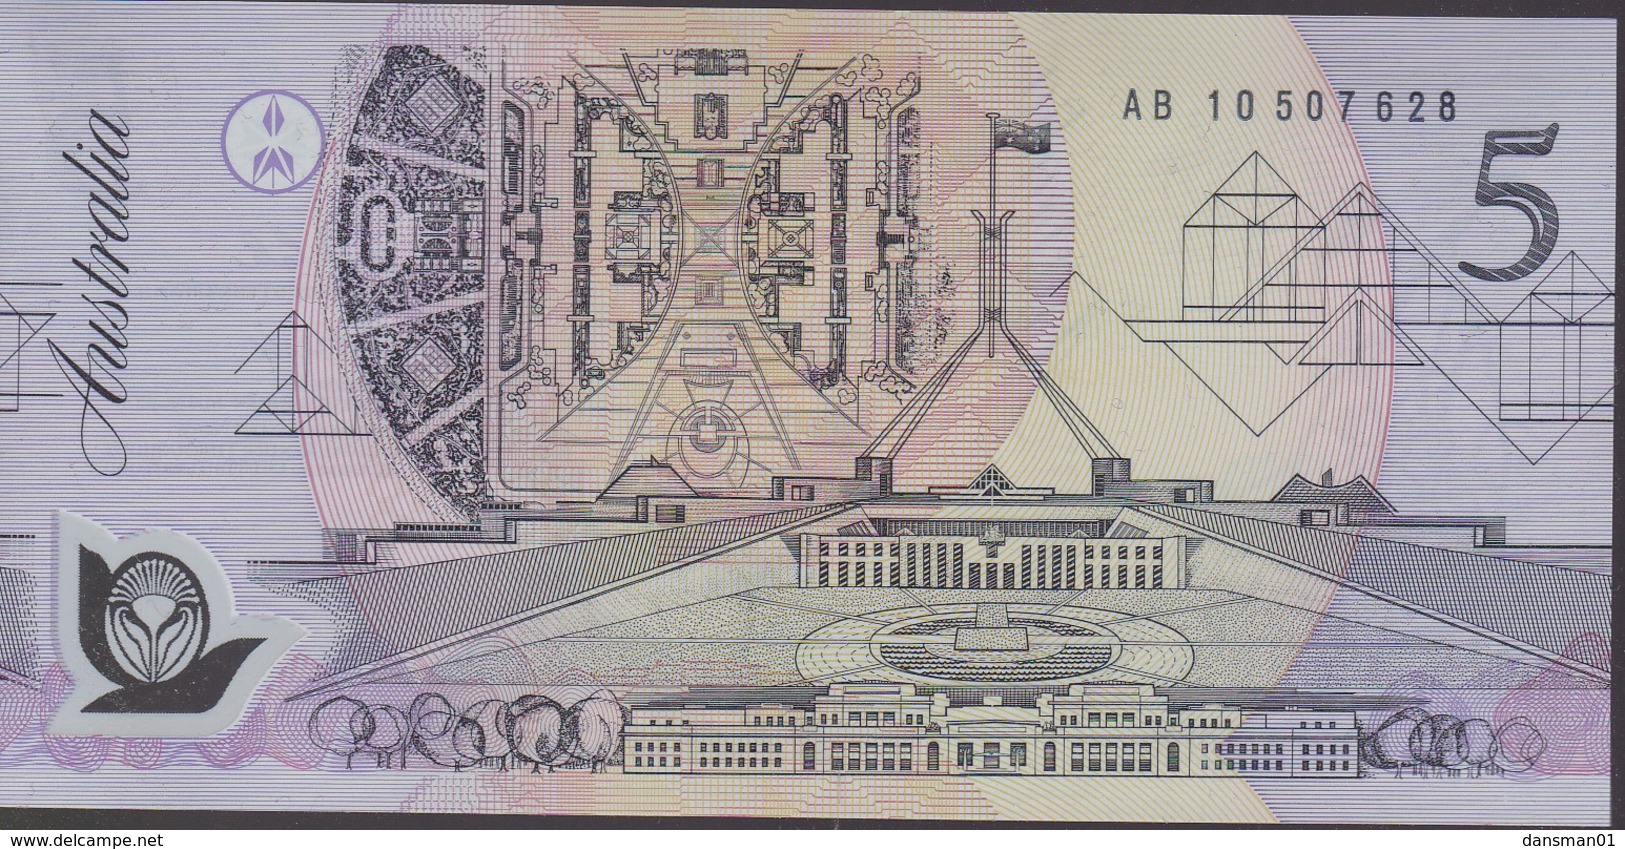 Australia 1992 Polymer $5 AB 10507628 Uncirculated - 1992-2001 (polymer Notes)